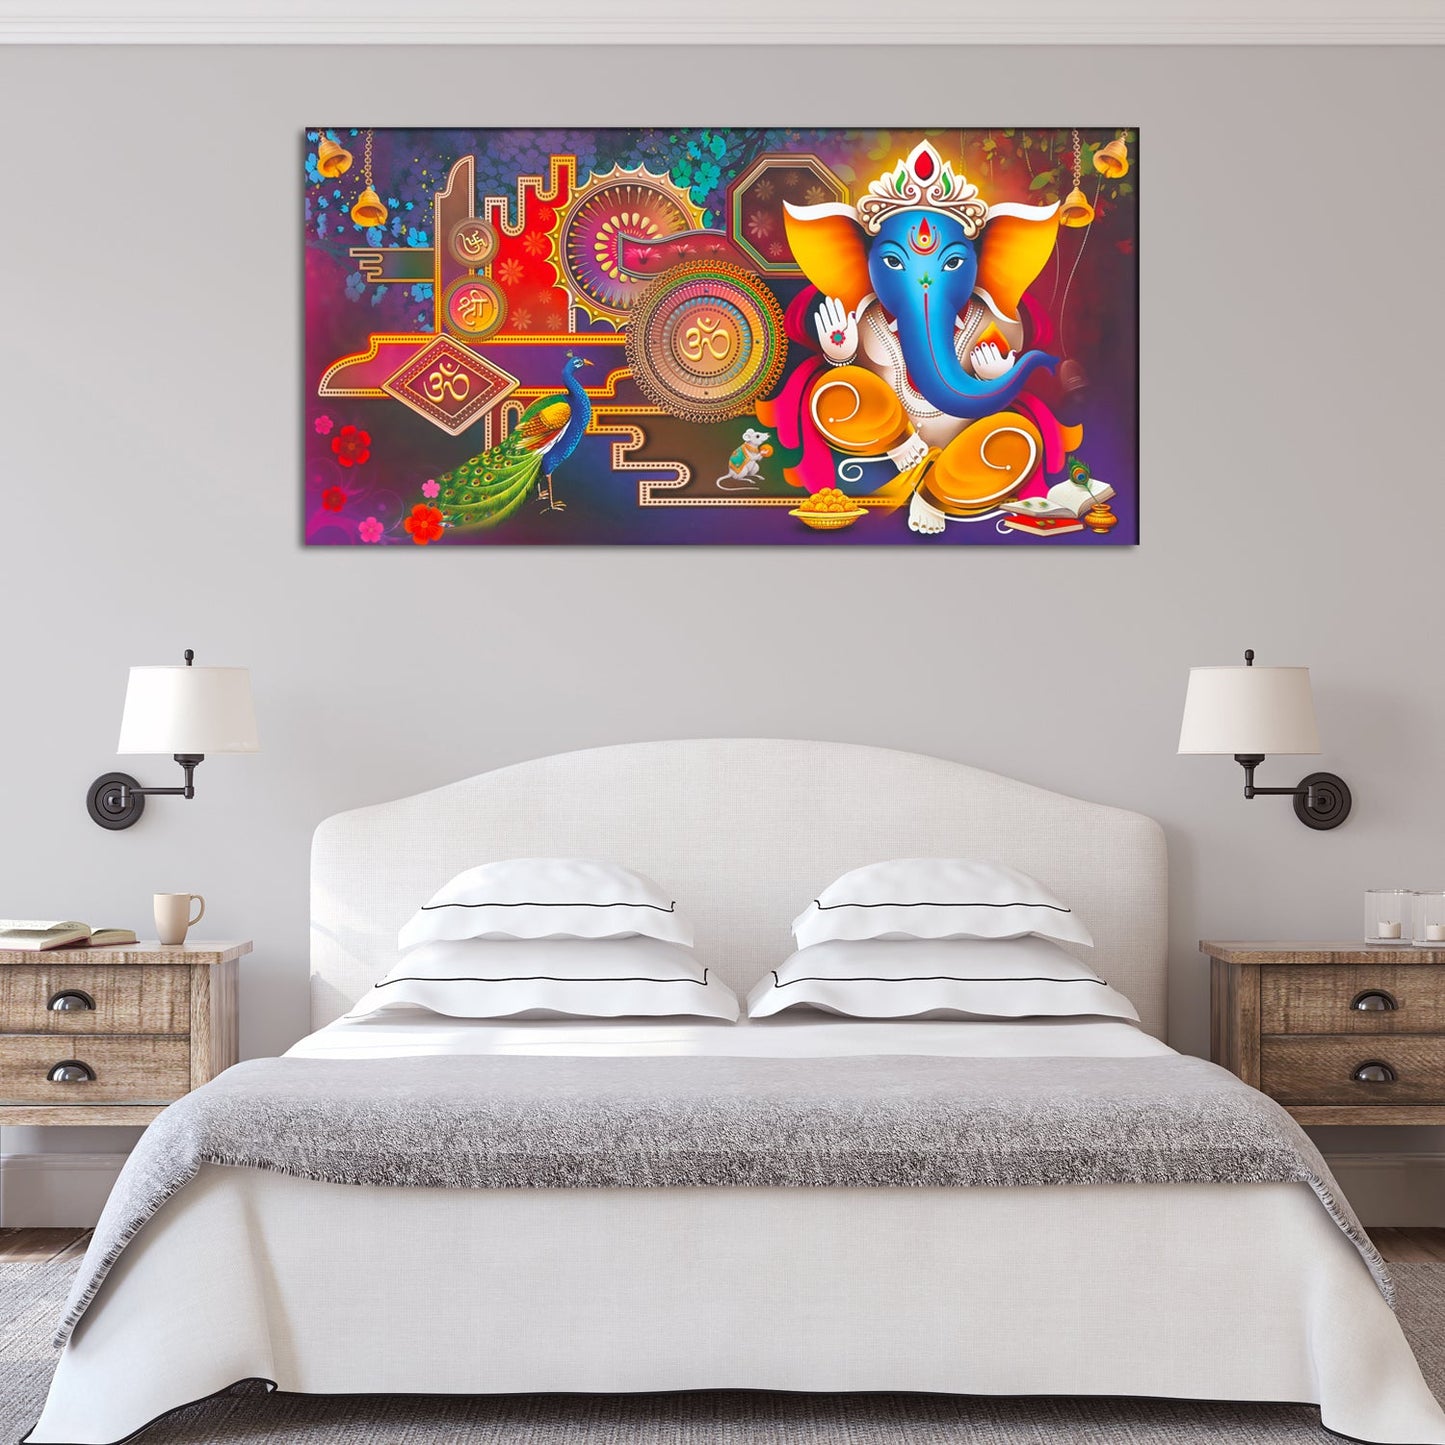 Canvas Wall Painting for home decor of lord ganesha